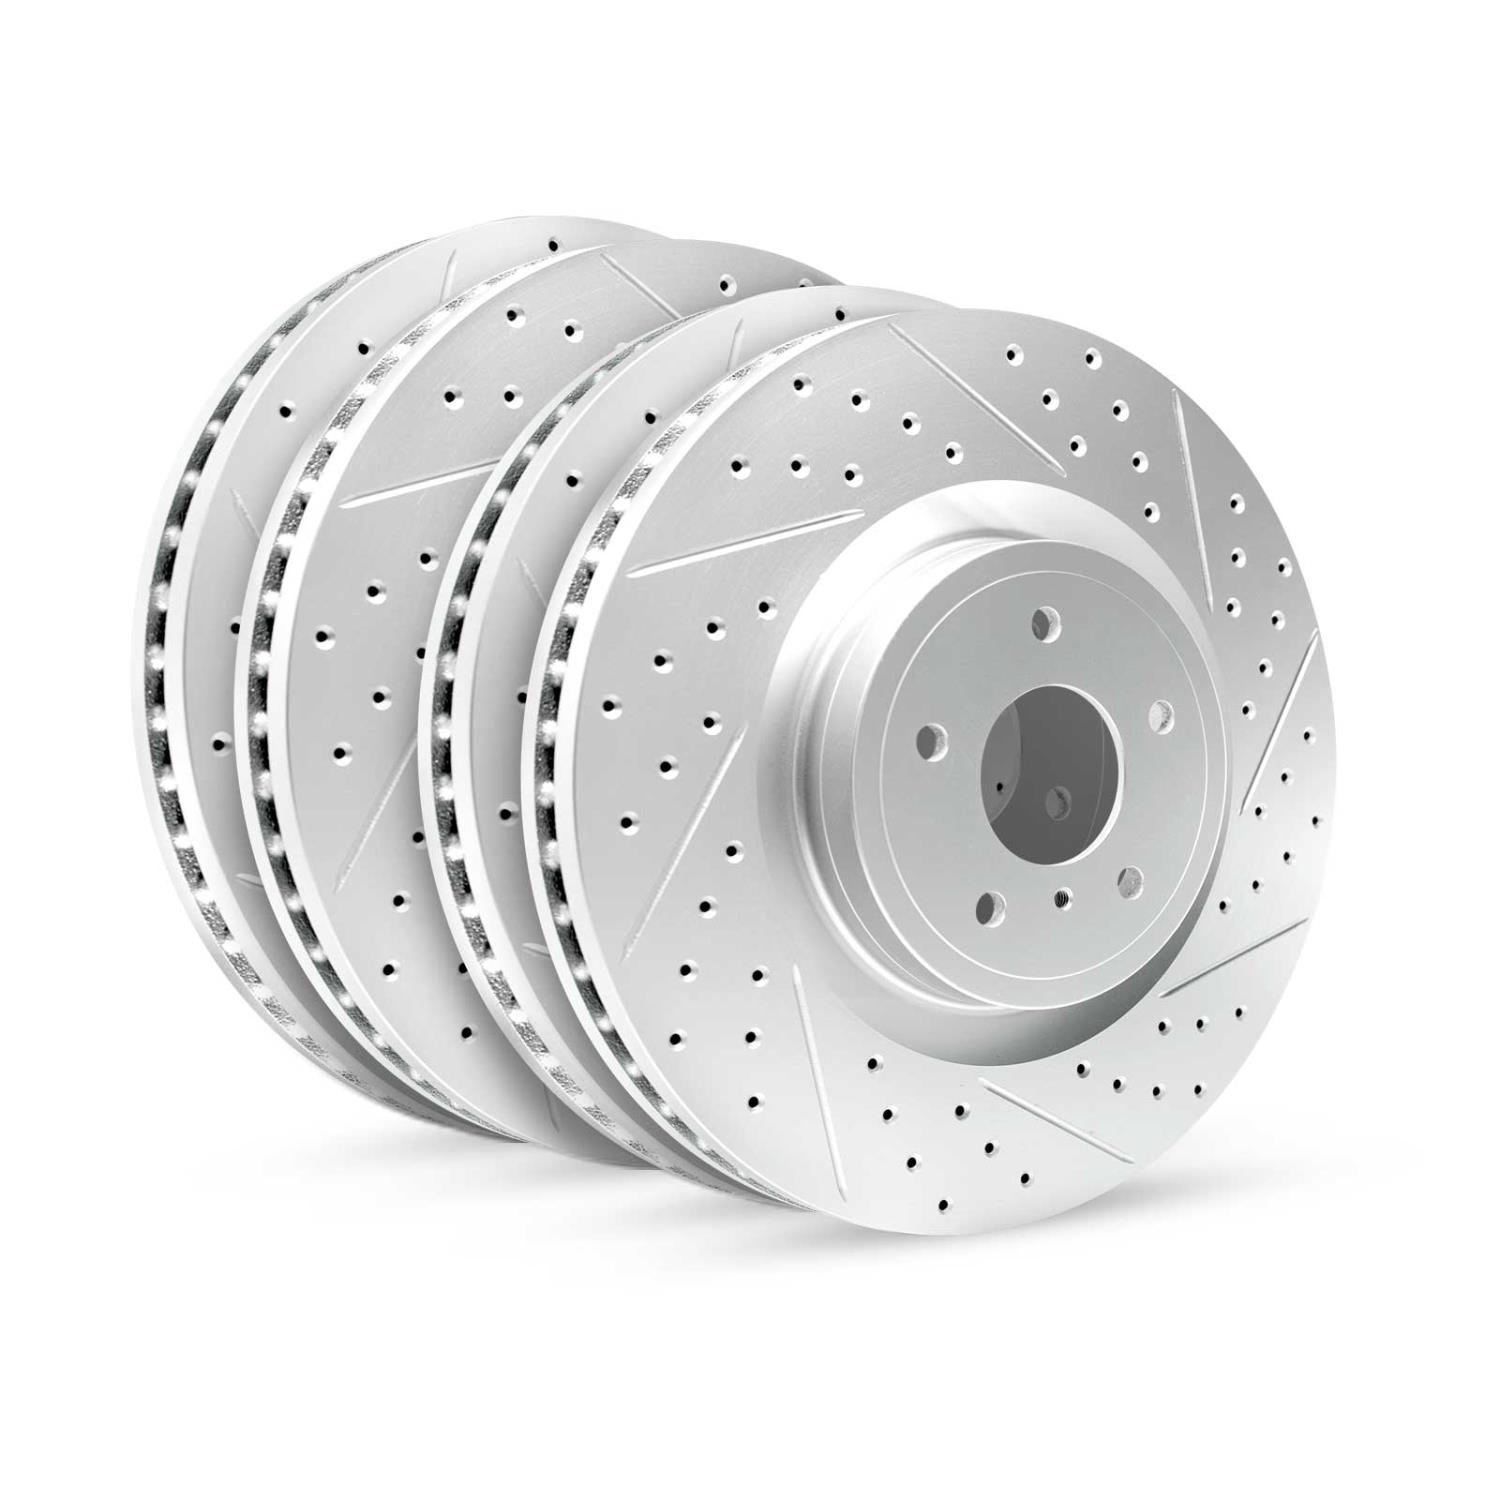 GEO-Carbon Drilled/Slotted Rotors, 2014-2020 Acura/Honda, Position: Front/Rear